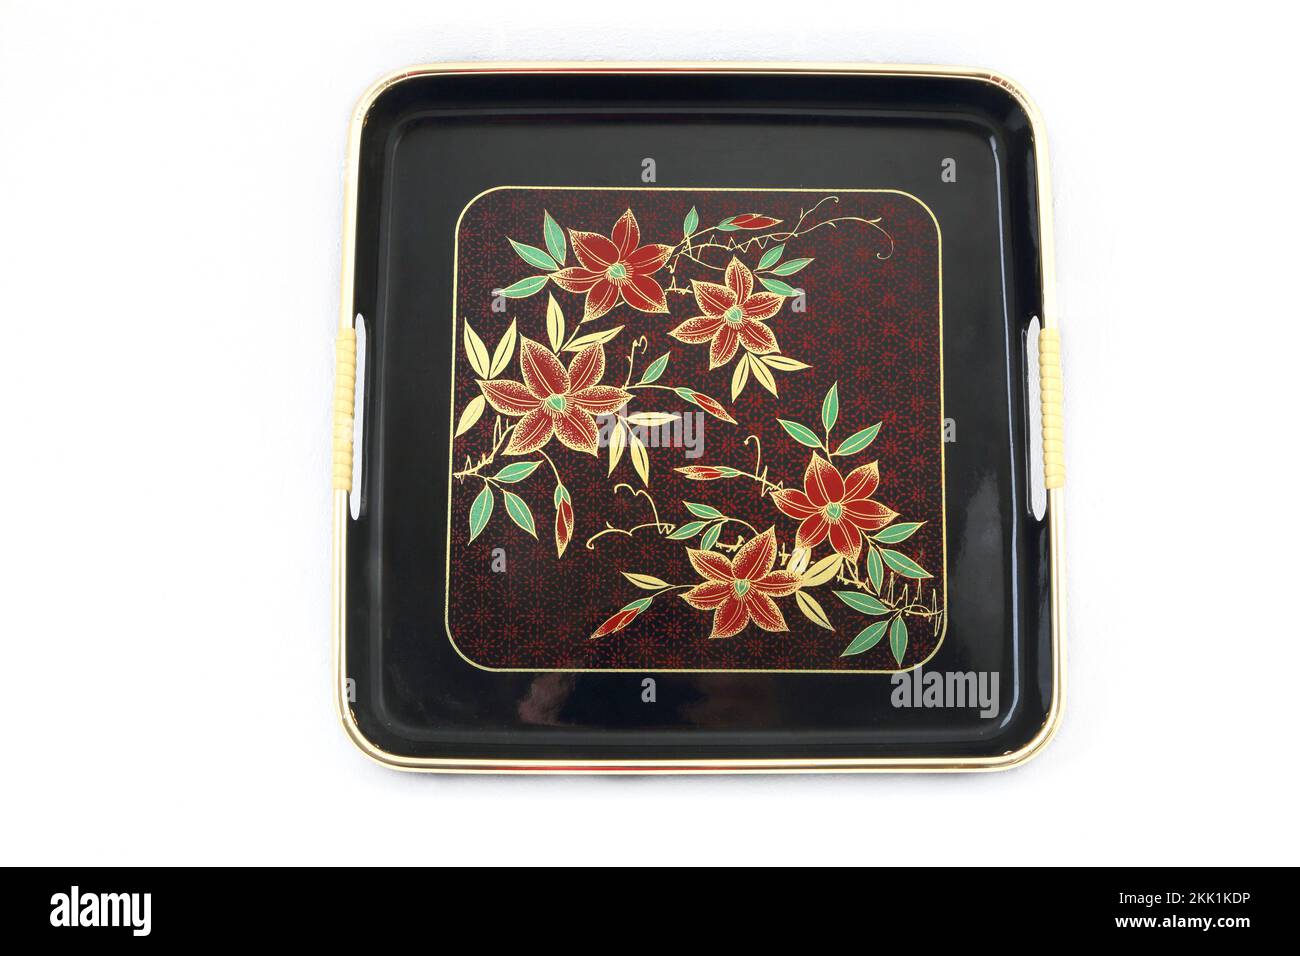 Vintage Laquered Japanese Tray with Poinsettias Stock Photo